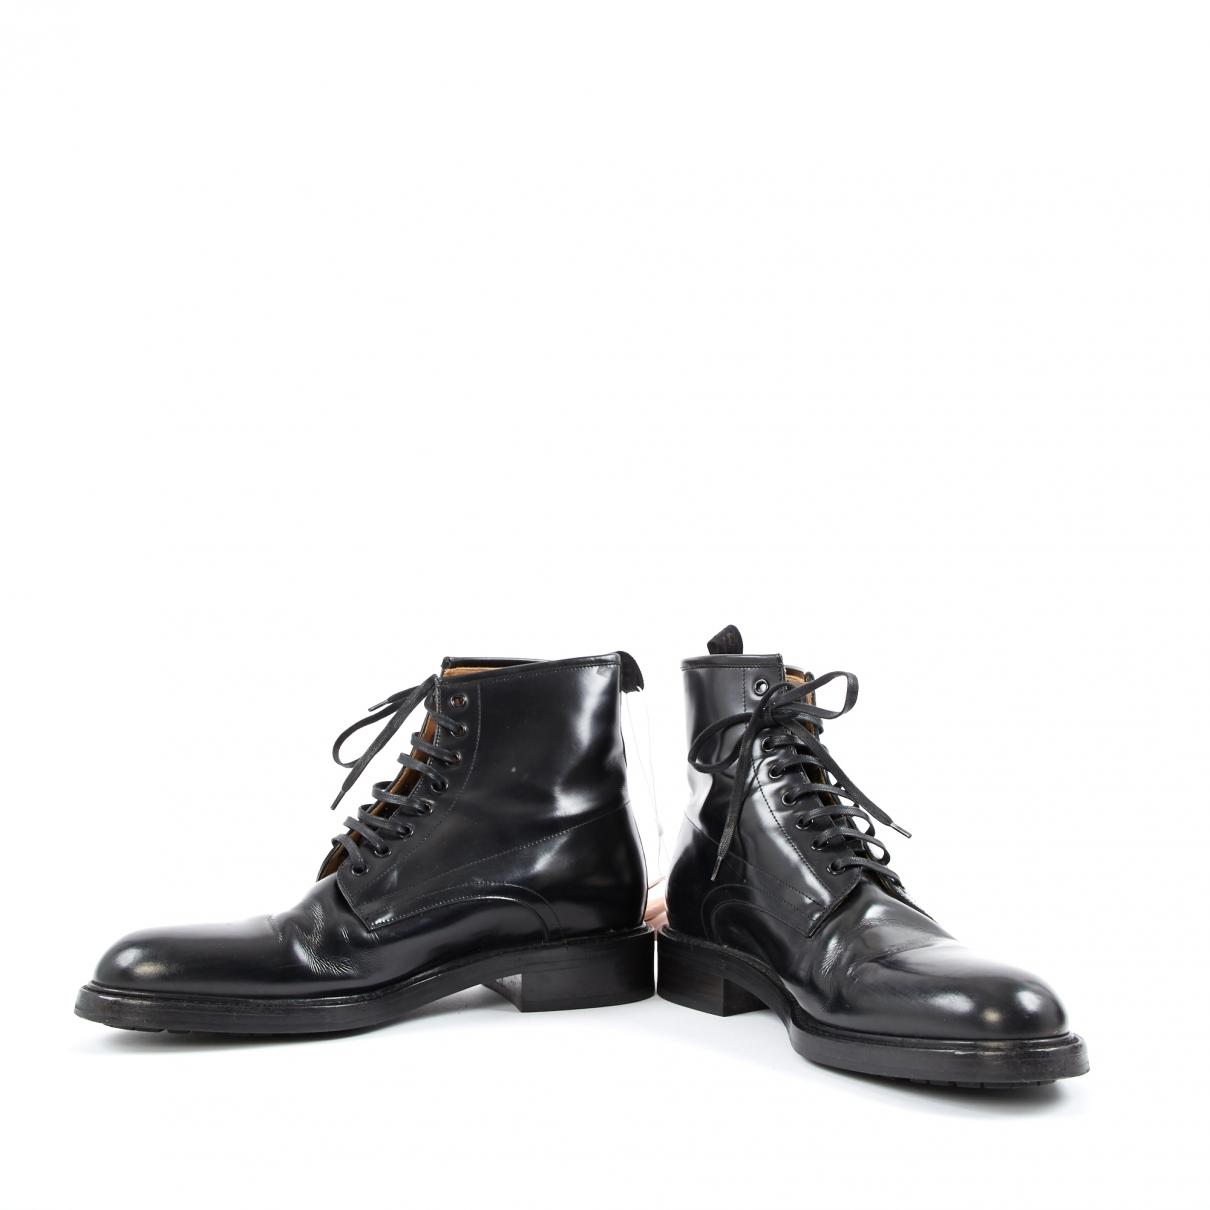 Louis Vuitton Leather Boots in Black for Men - Lyst